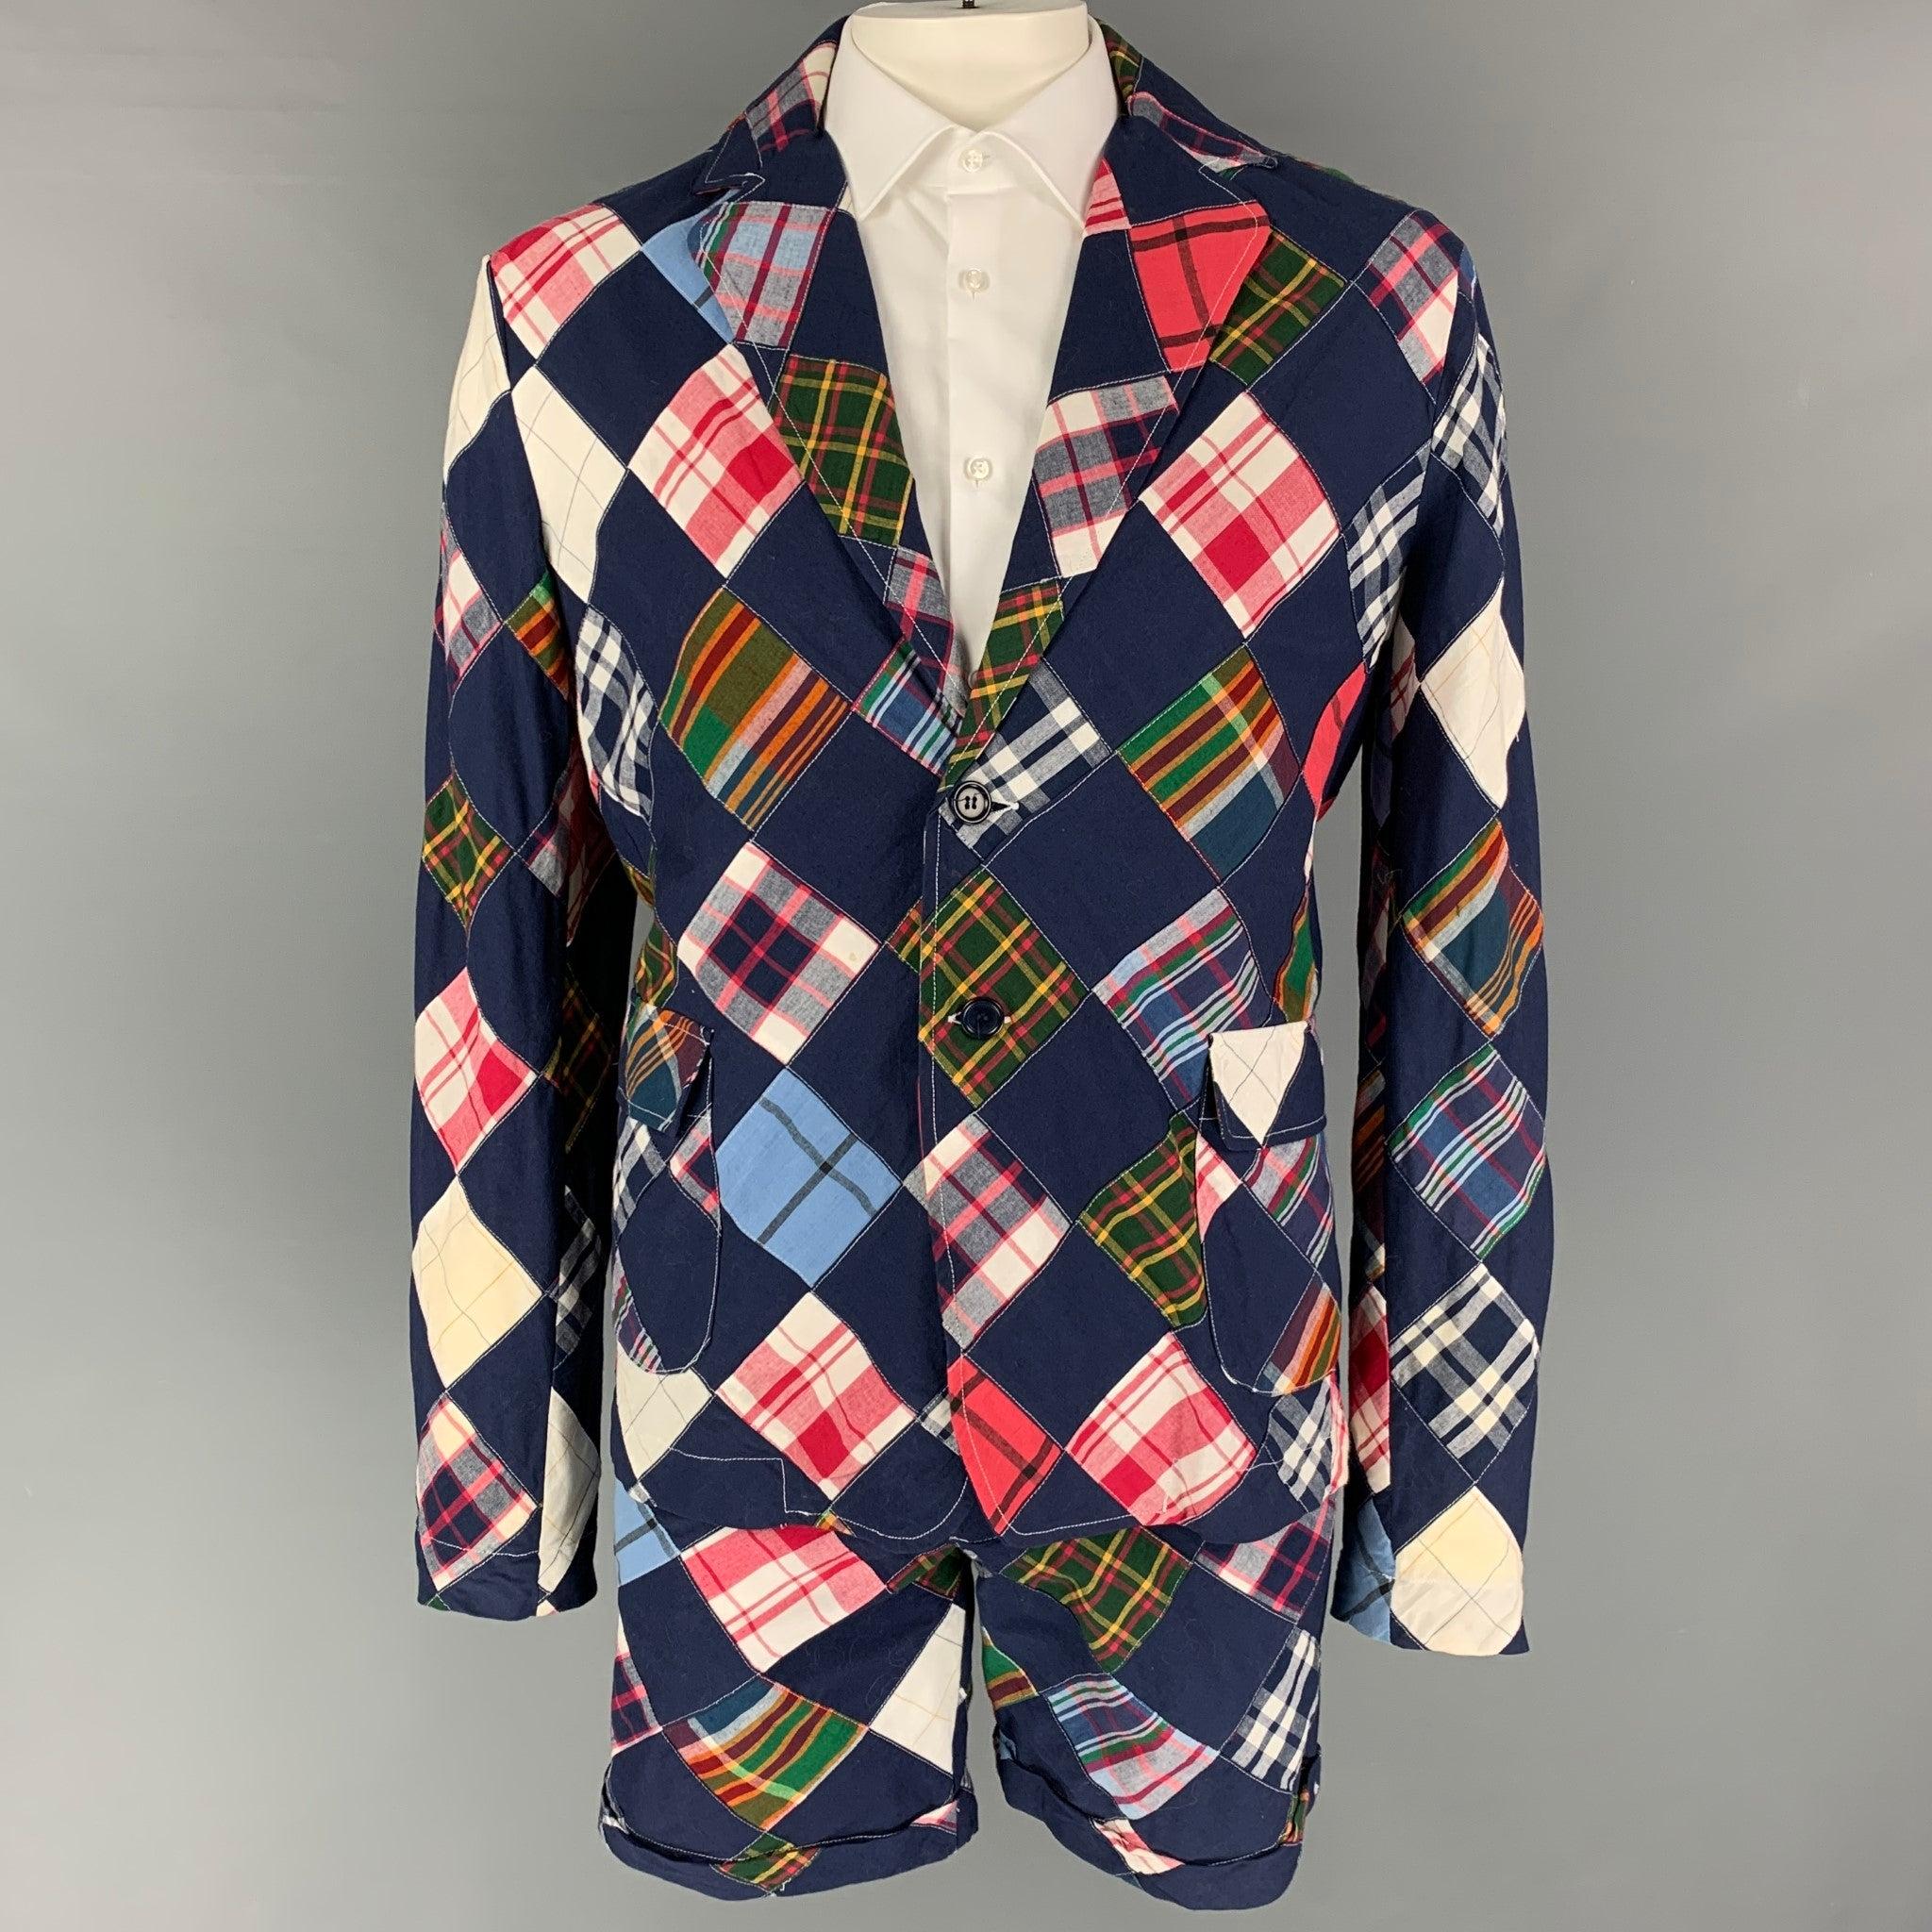 BAND OF OUTSIDERS
'This Is Not A Polo Shirt' suit comes in a navy & multi-color patchwork cotton and includes a single breasted, double button sport coat with a notch lapel and matching flat front shorts. Made in USA.Very Good Pre-Owned Condition.